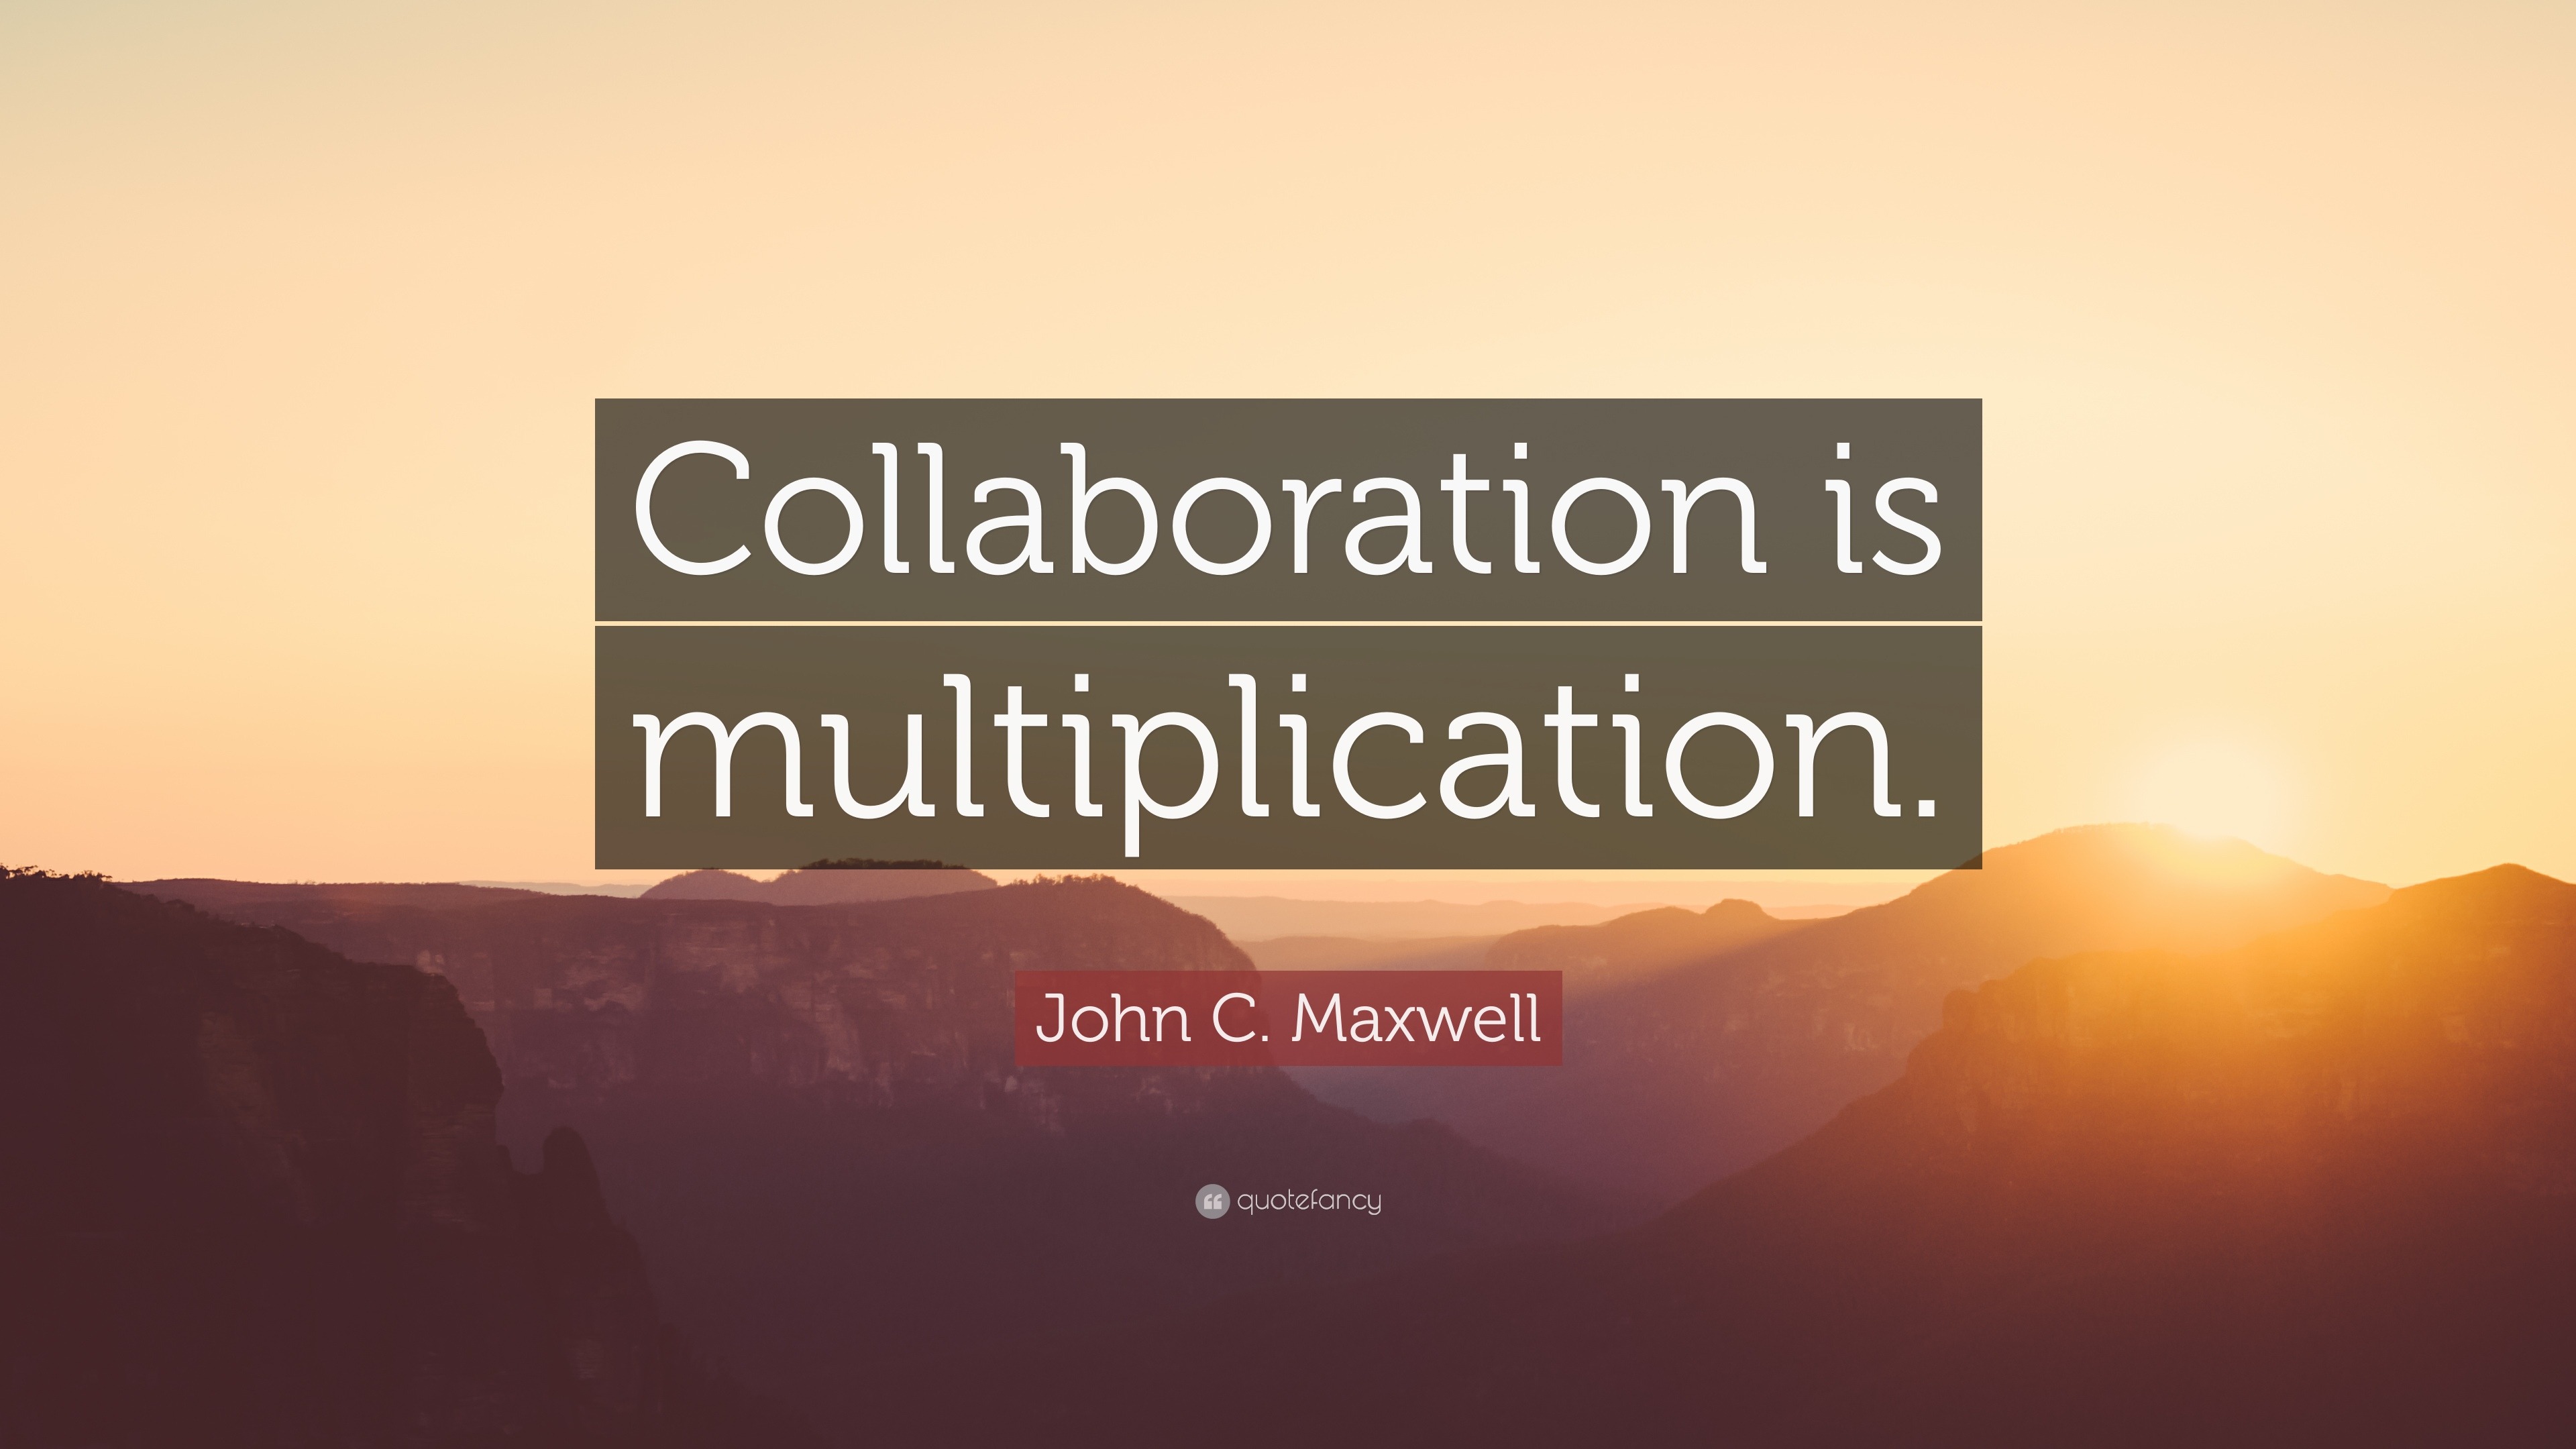 John C. Maxwell Quote “Collaboration is multiplication